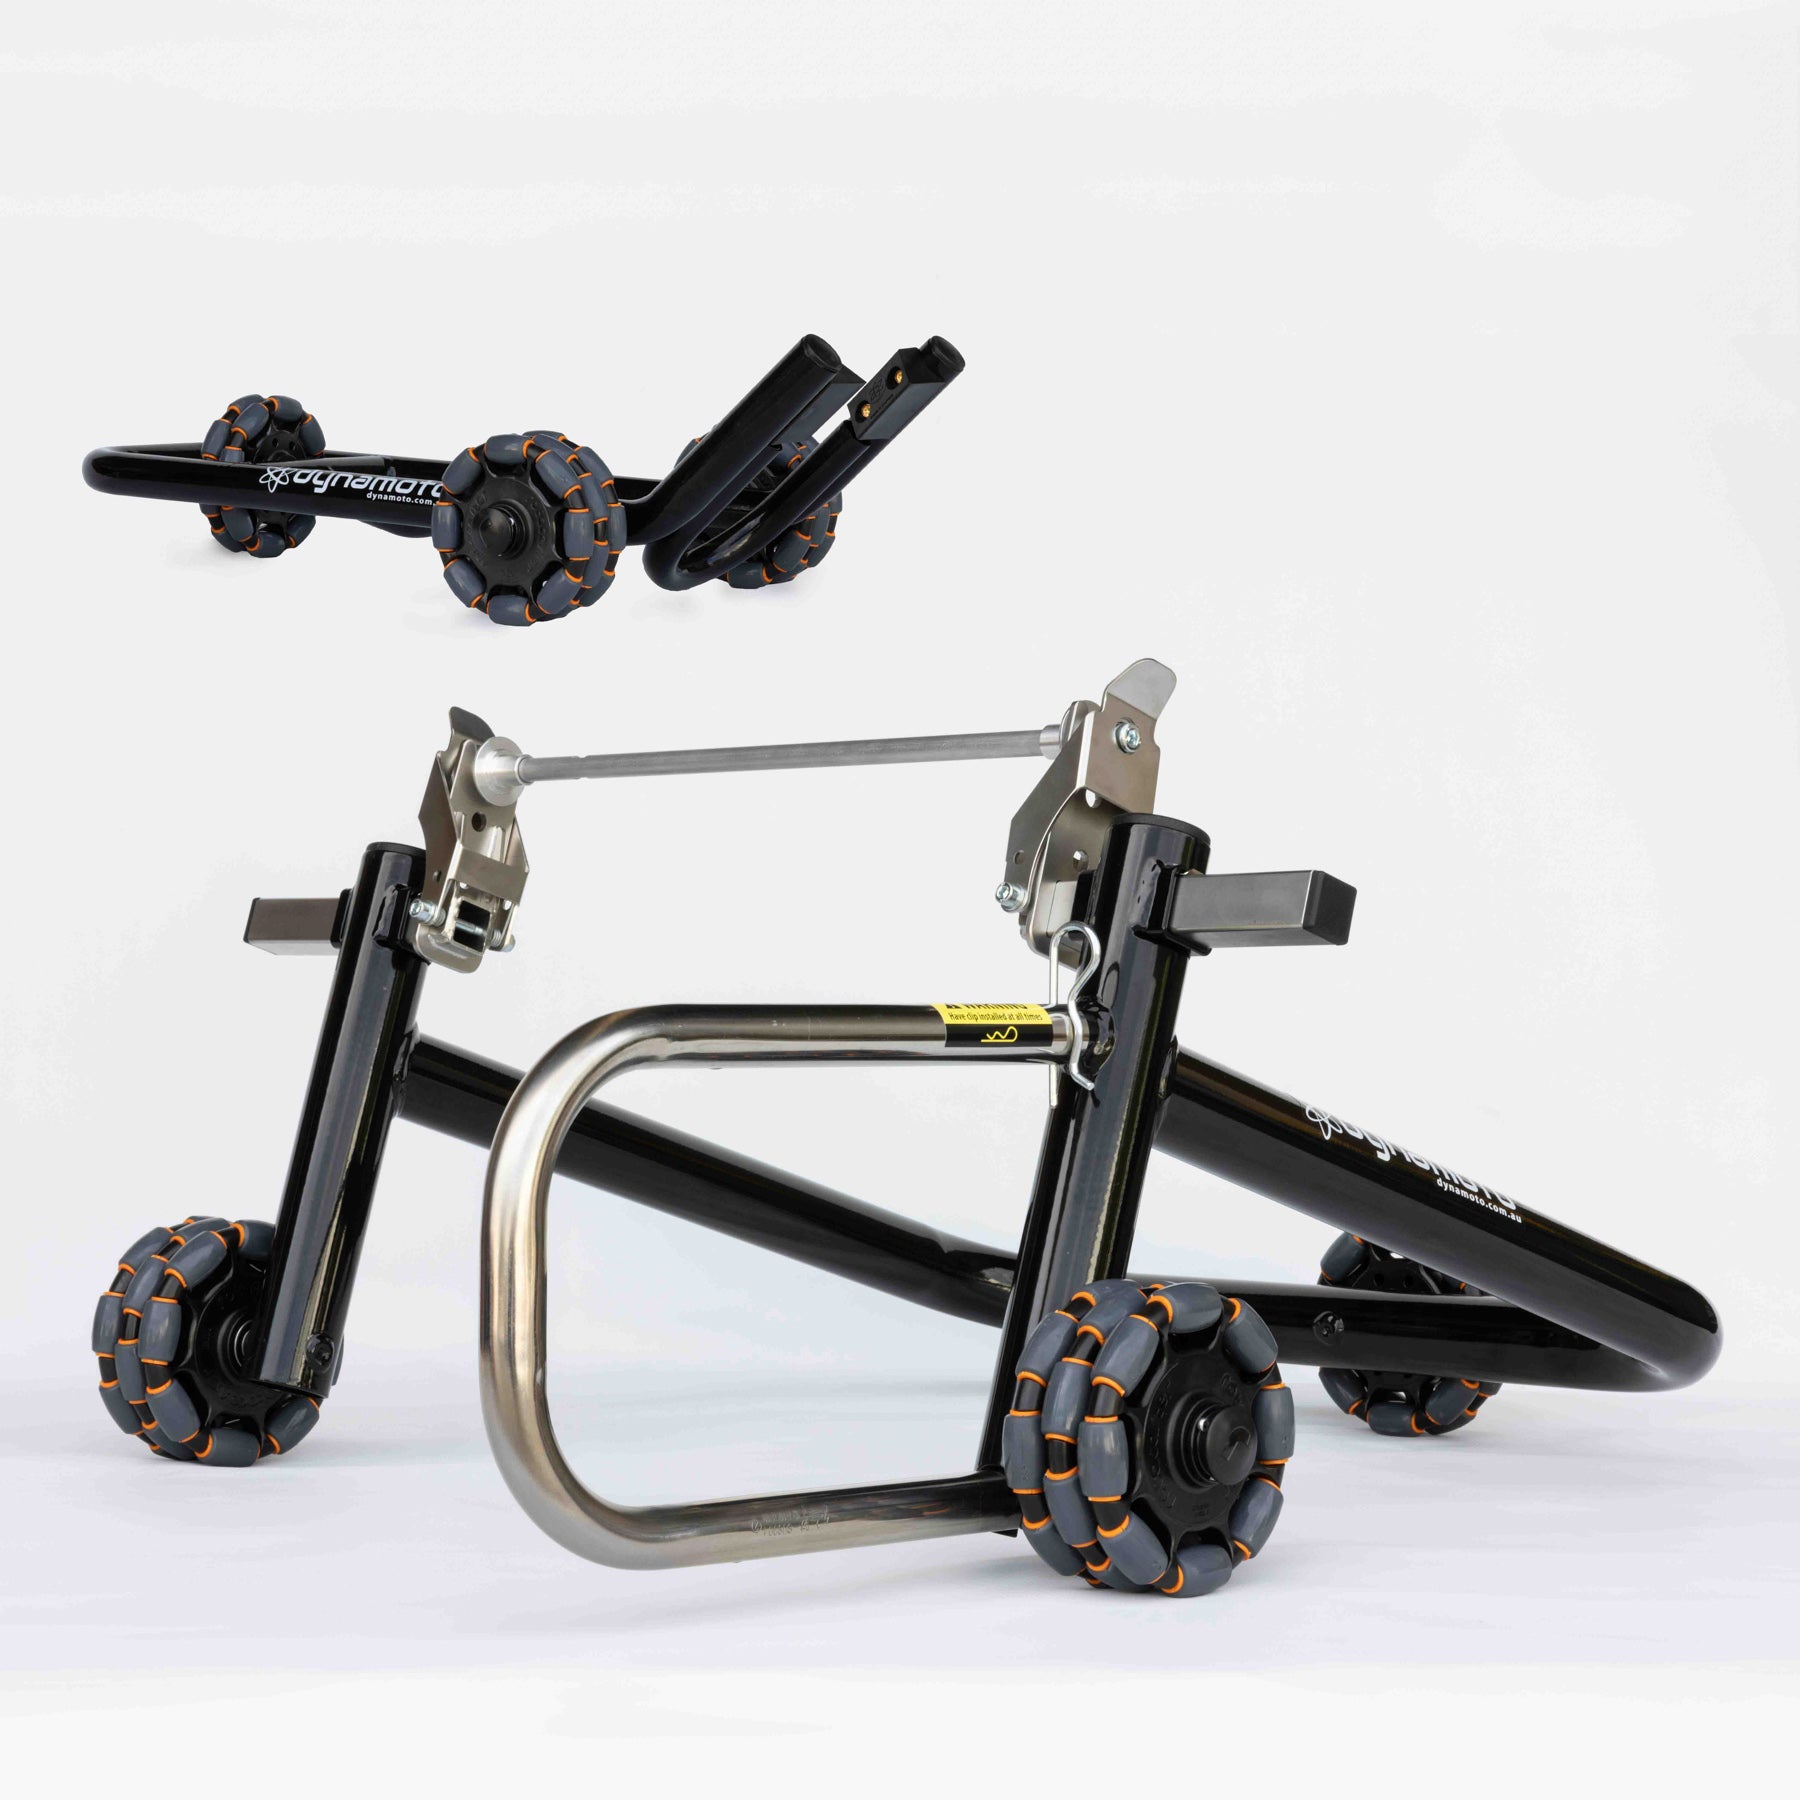 HARLEY DAVIDSON FRONT AND REAR MOTORCYCLE STANDS - By Dynamoto